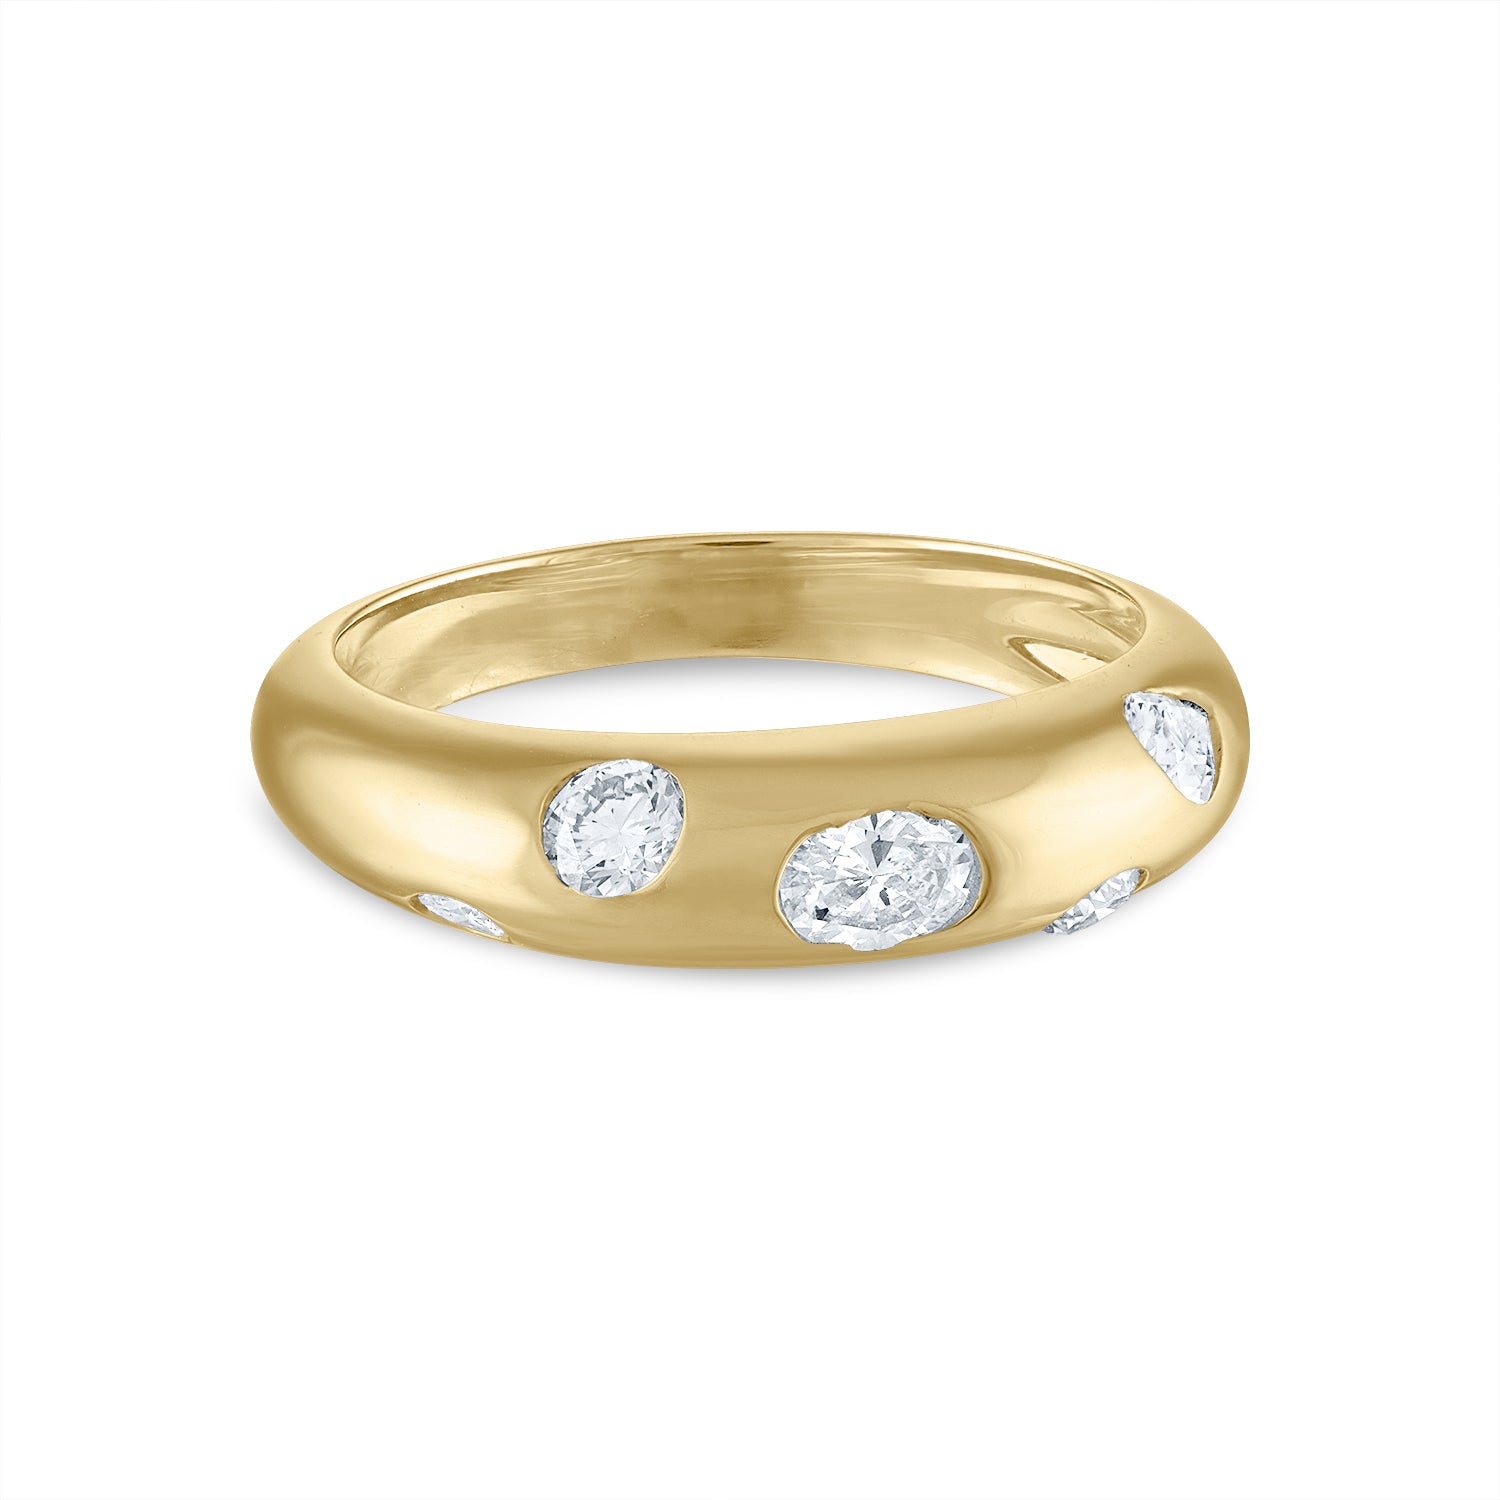 Thin Dome Ring with Ellipse and Random Diamonds